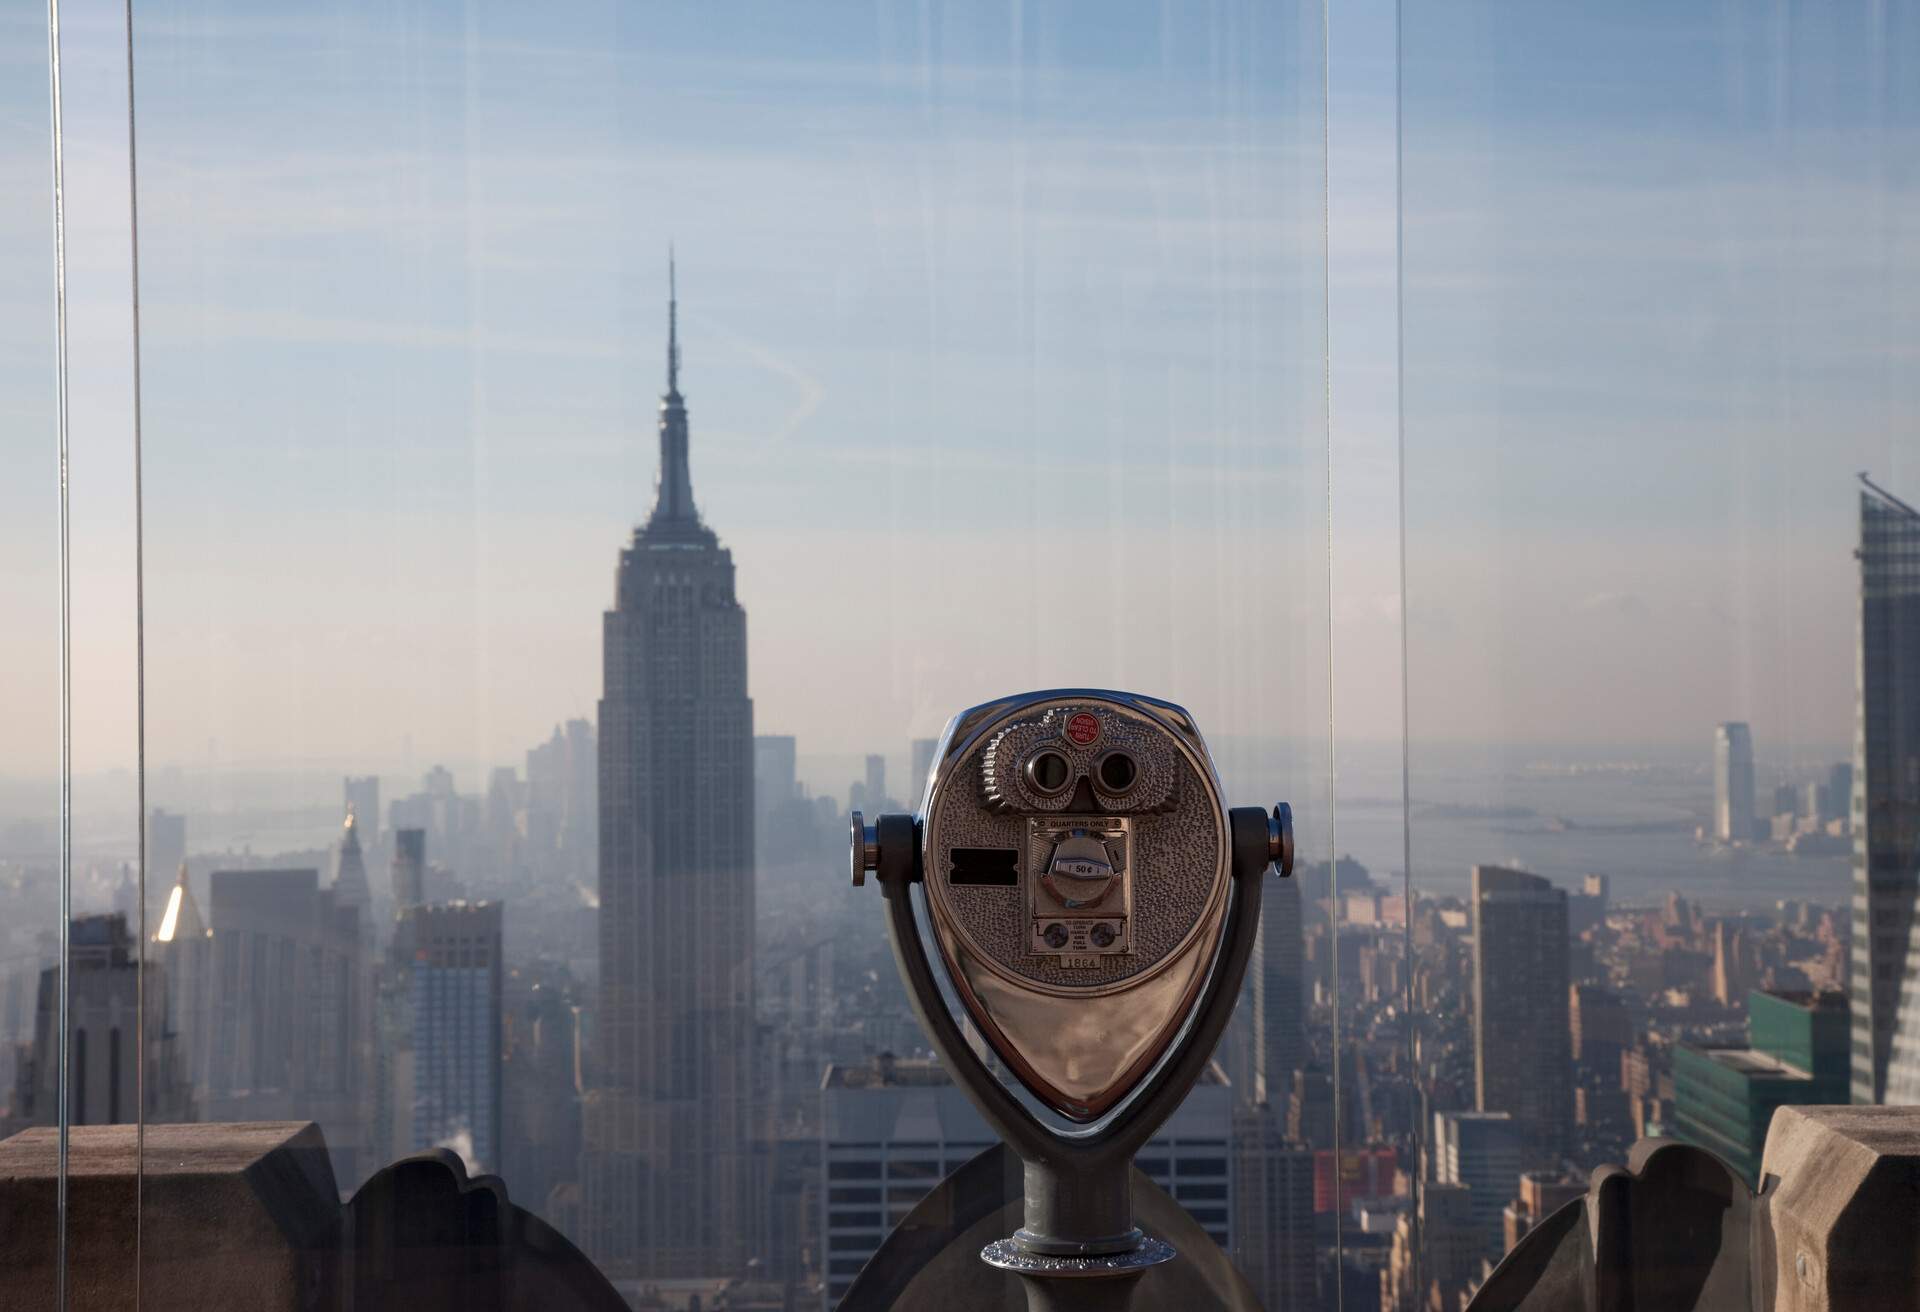 View from 'The Top of the Rock' at Rockefeller Center